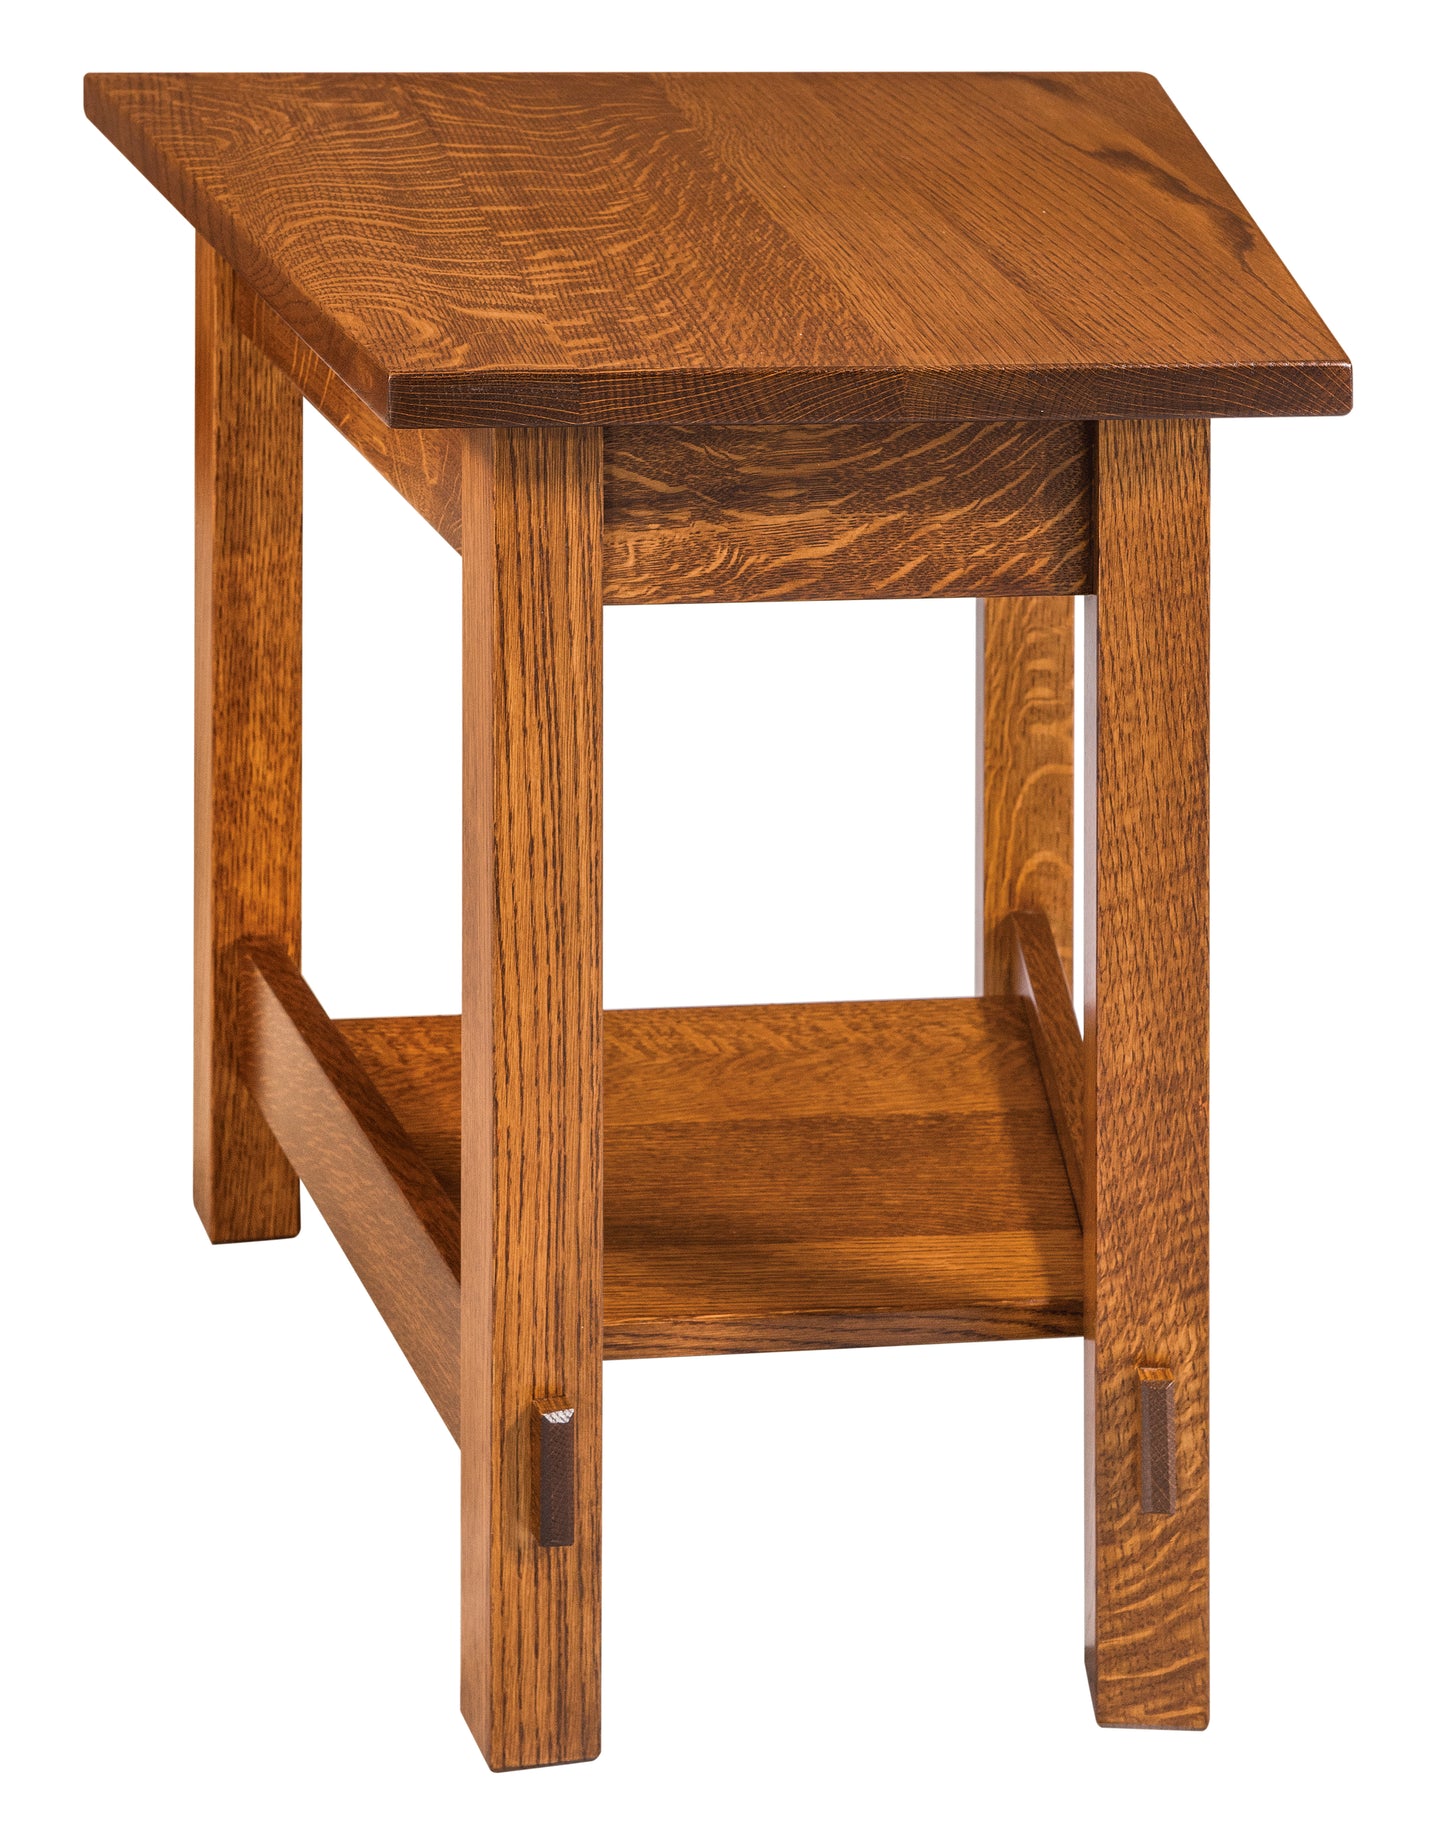 Springhill Craftsman Open Wedge Side Table